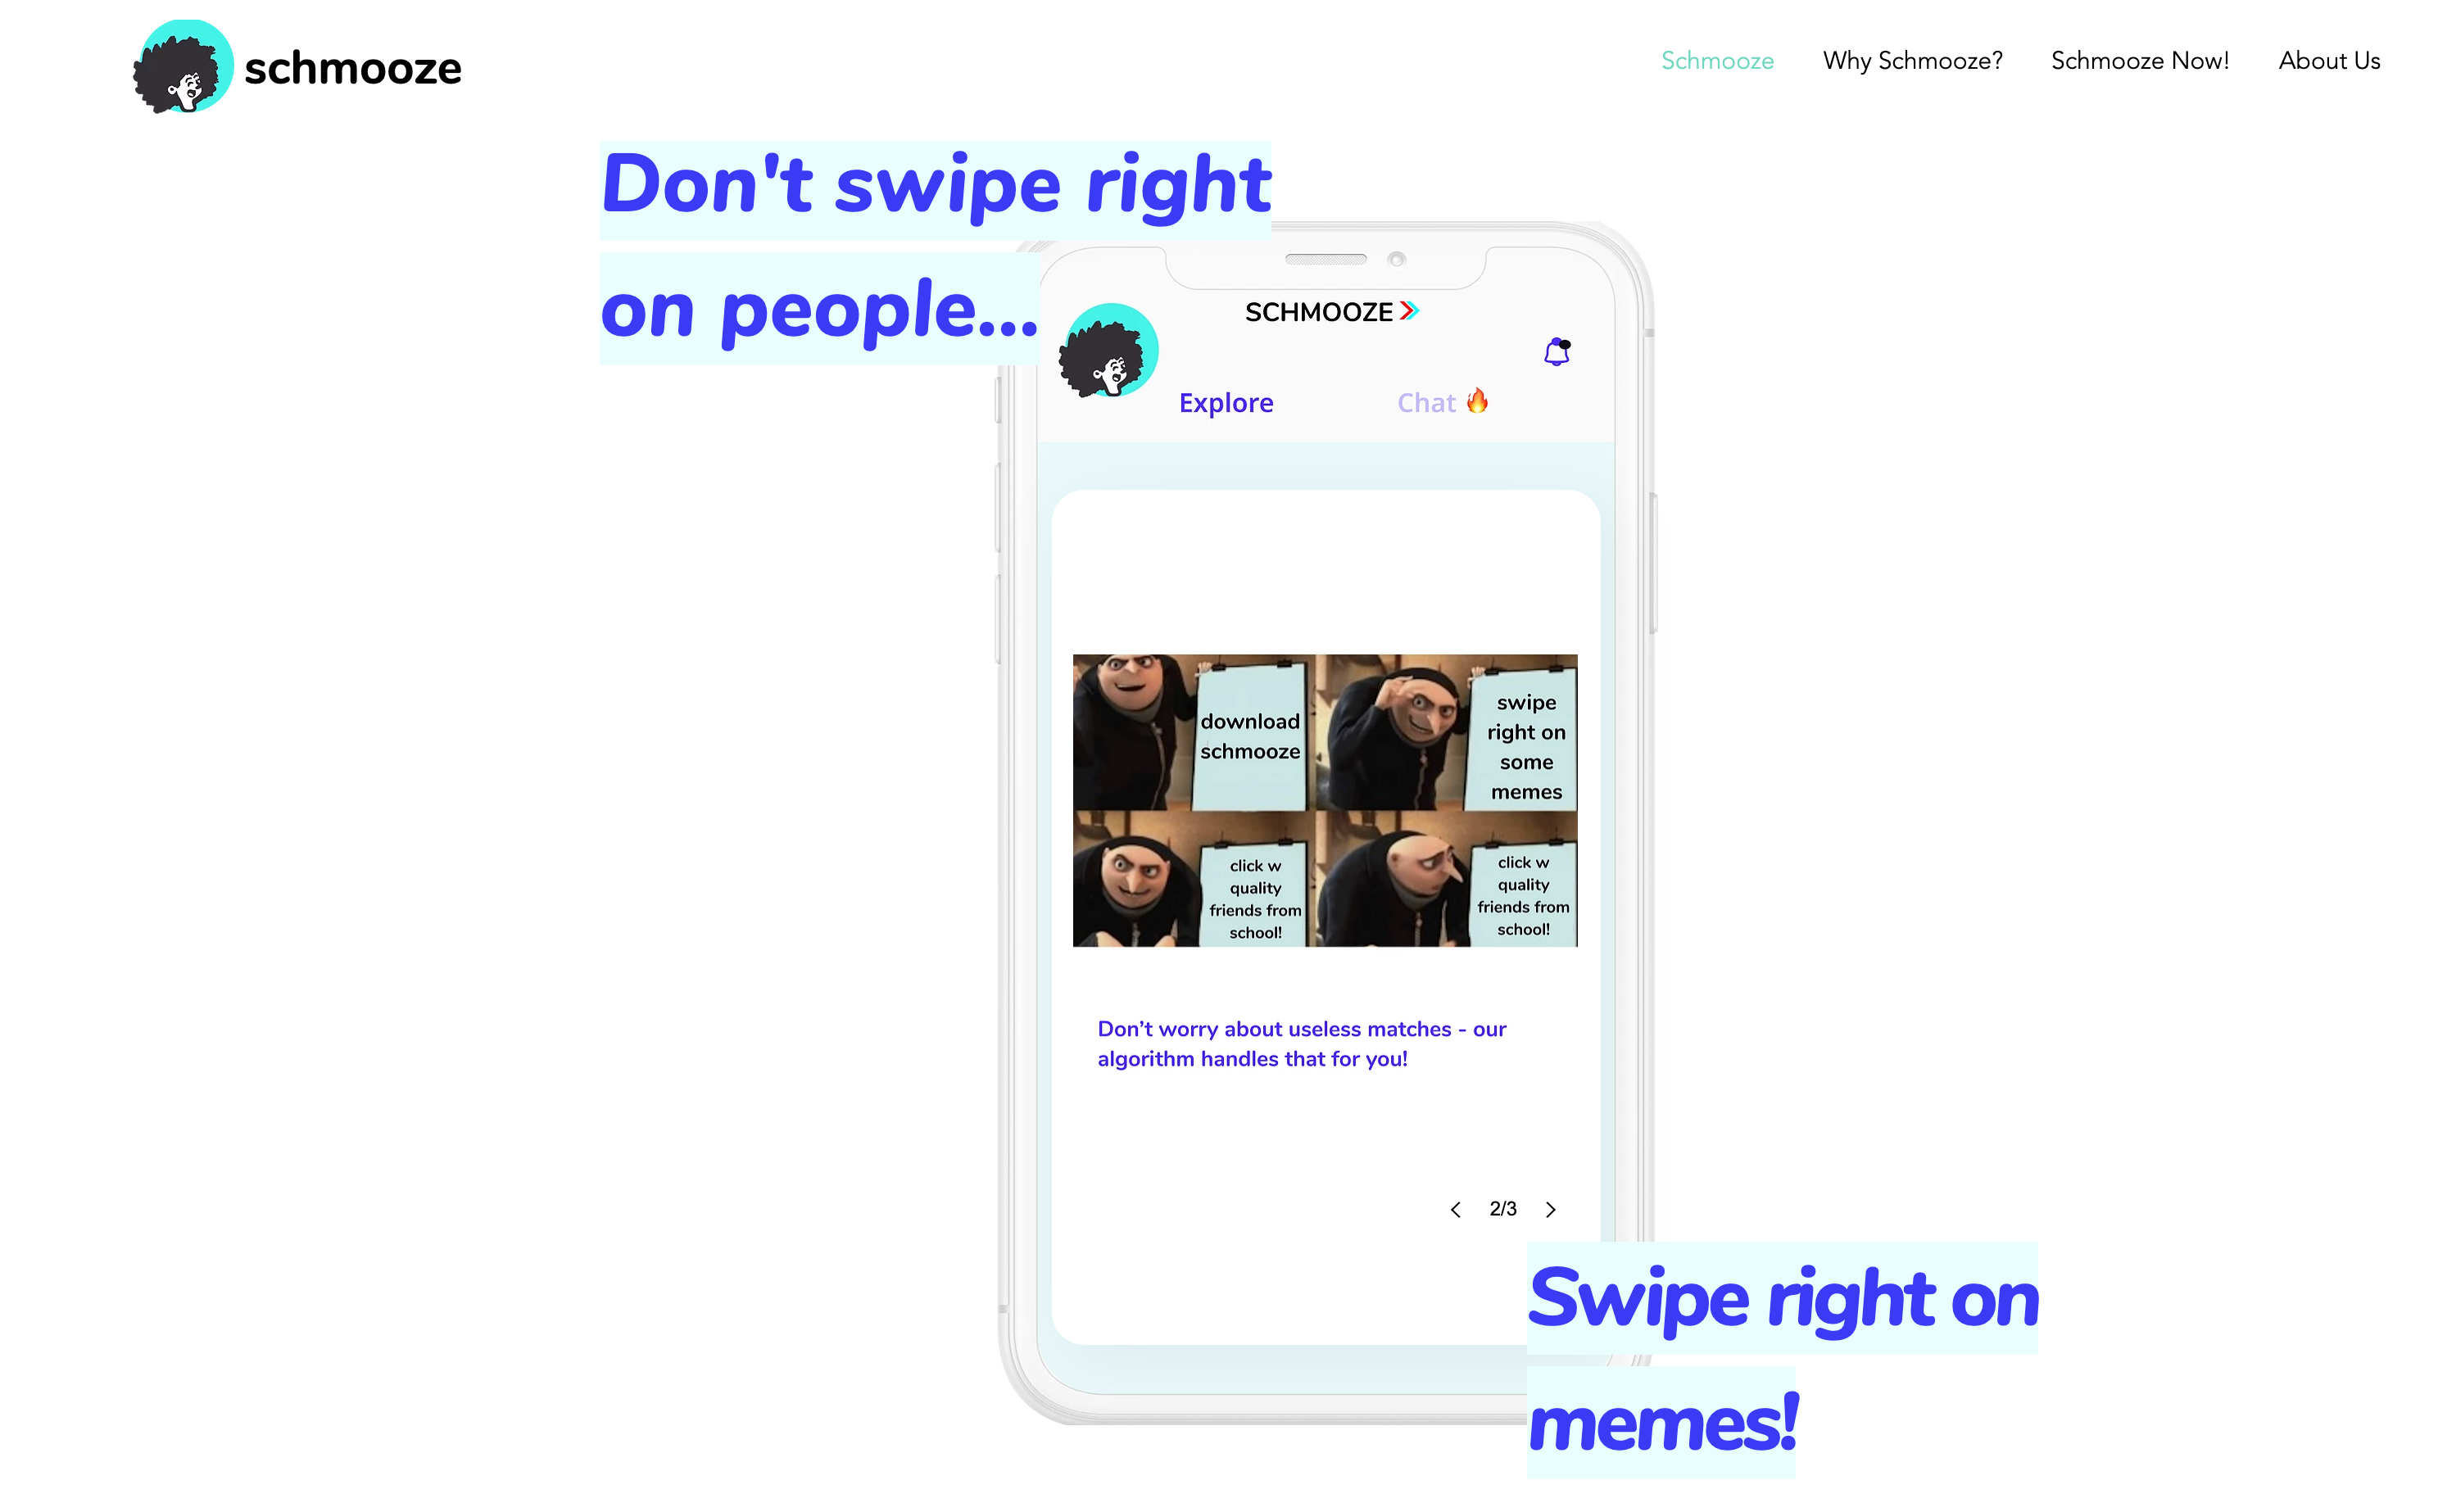 How to make meme on iPhone. Memes are now our favorite culture